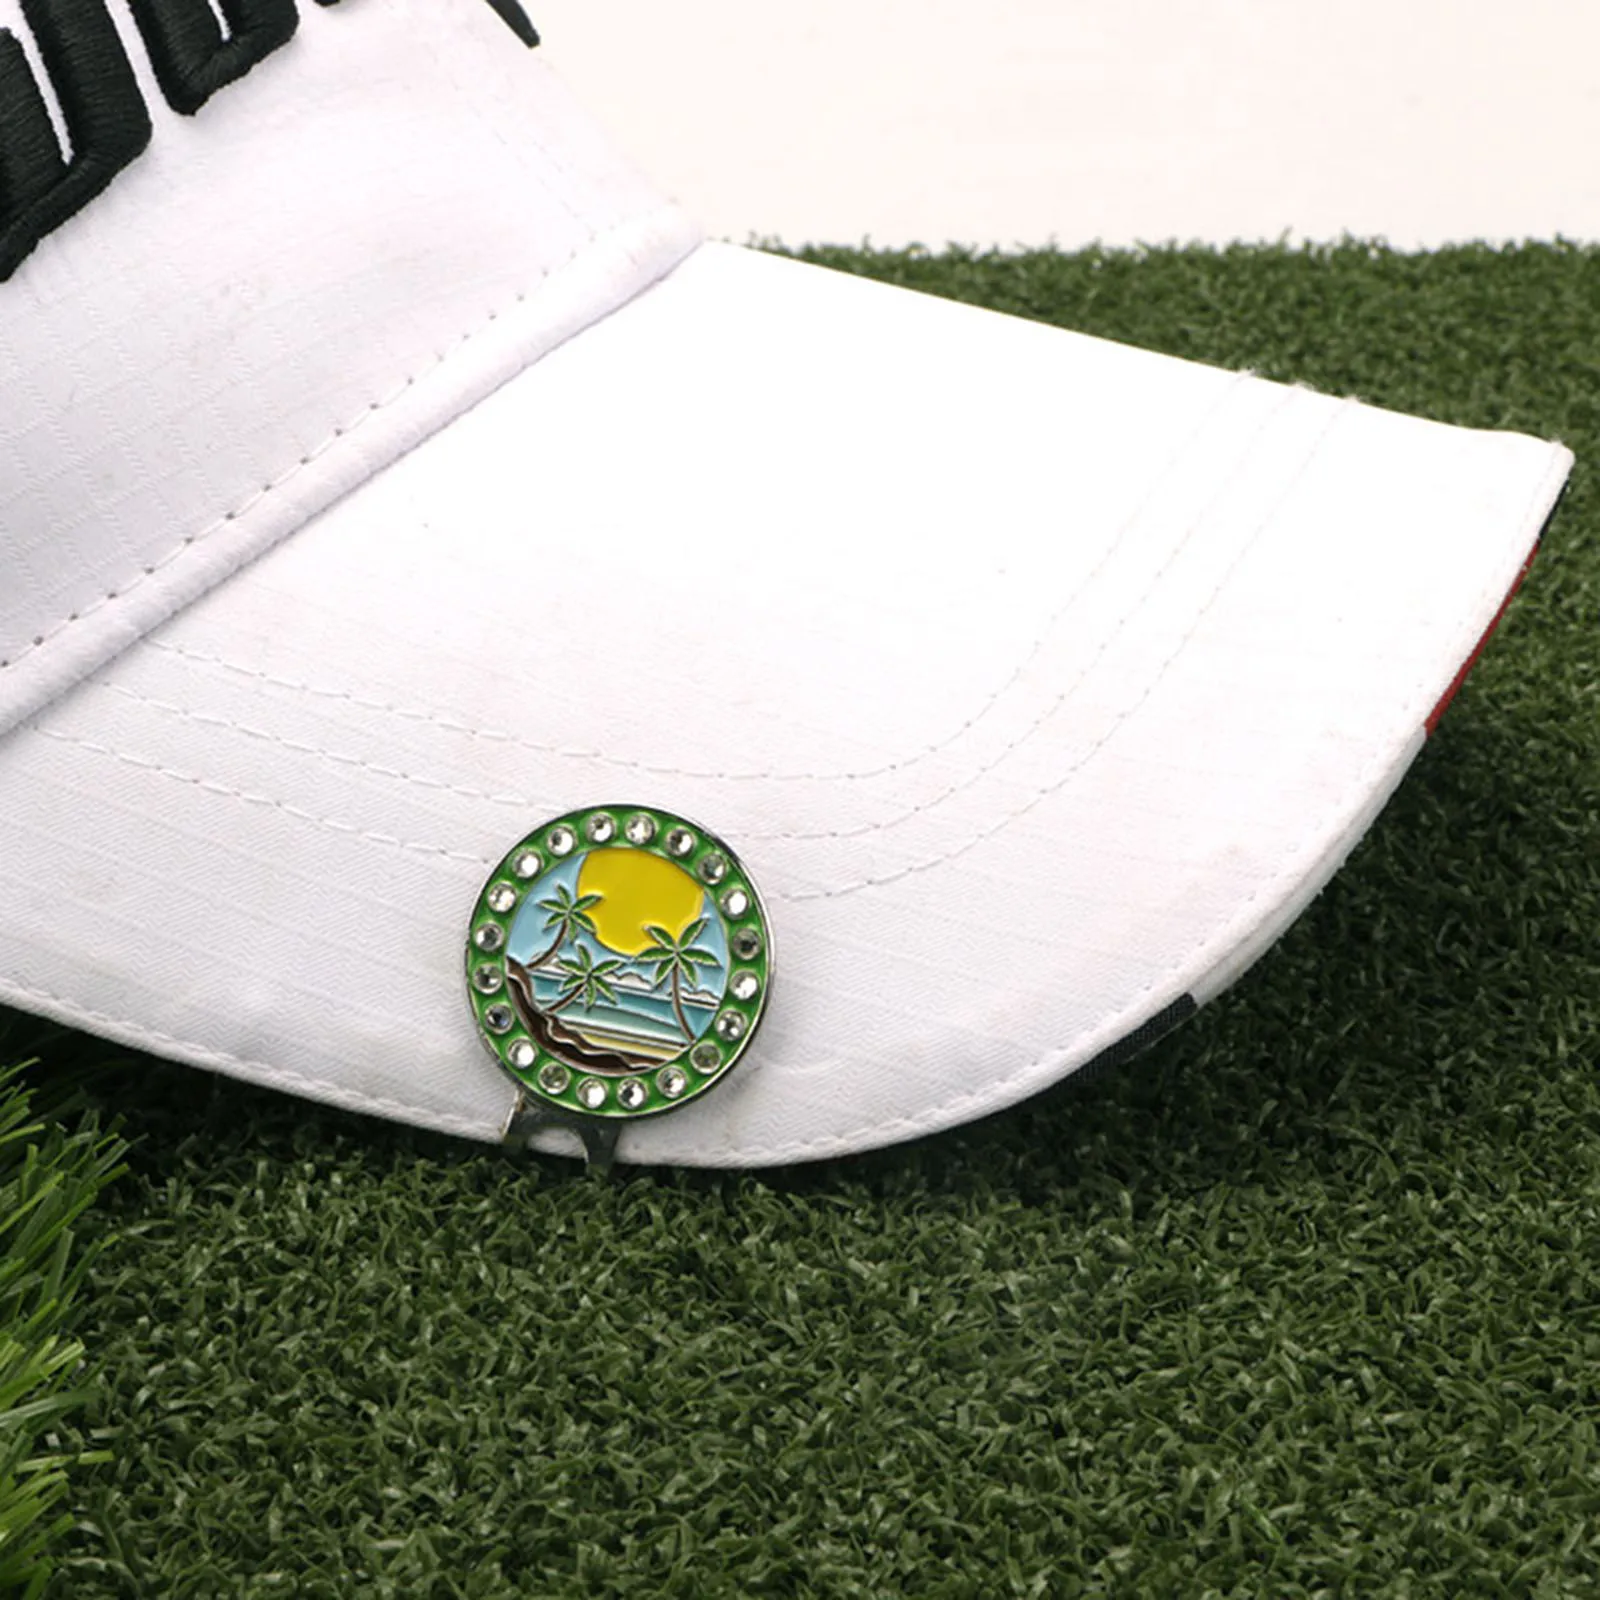 Magnetic Golf Ball Marker Hat Clip Golf Putting Training Ball Position Mark Sign Accessories Hat Clips Removable Magnetic Equip